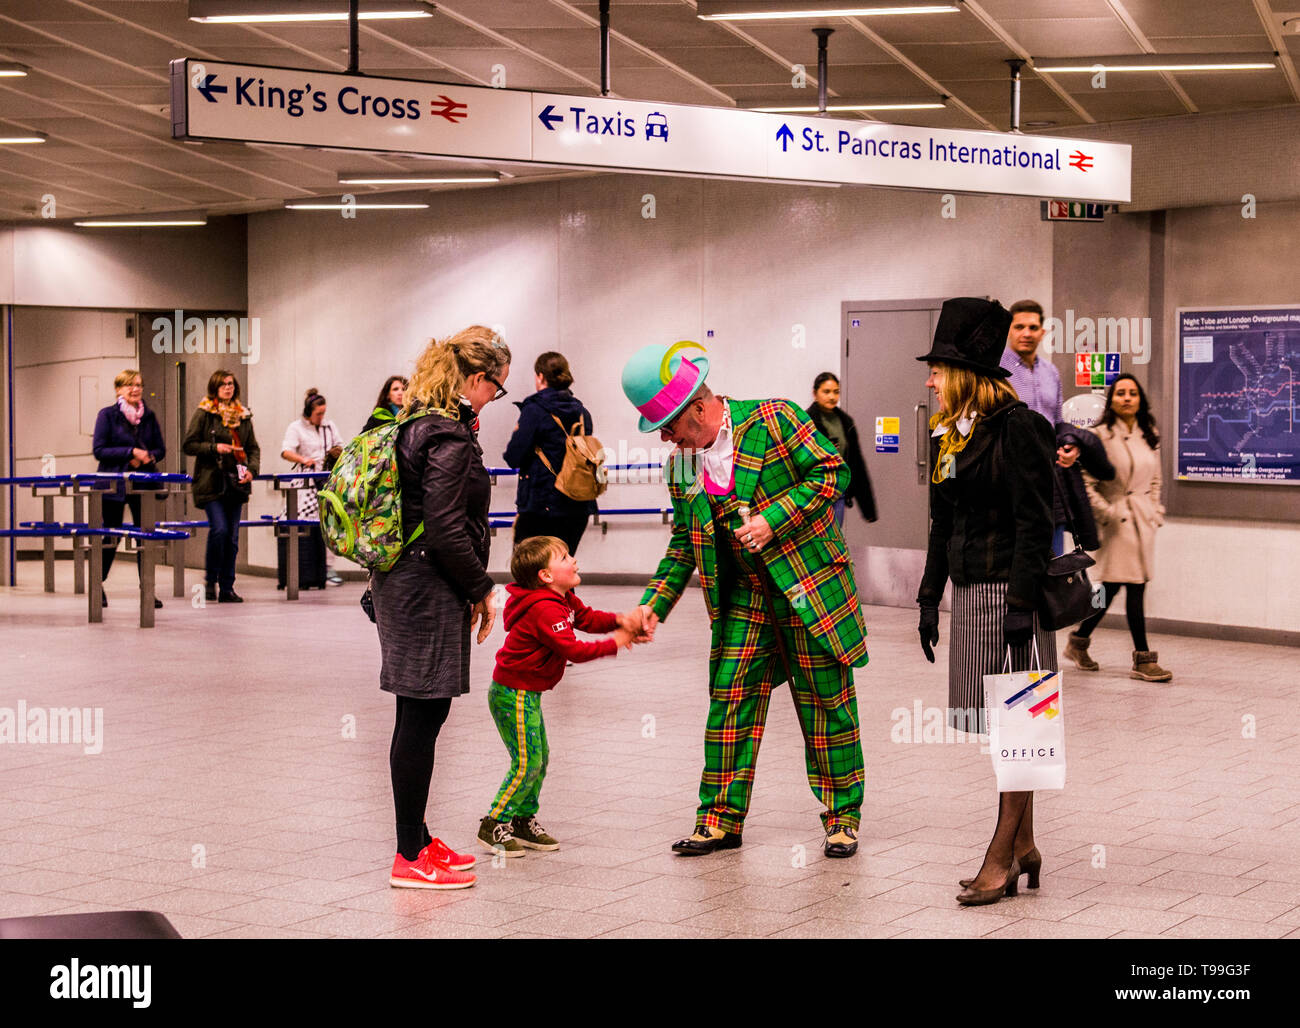 Young child with mother, shaking hands with man dressed in clown suit, Kings Cross underground station, London, England, UK Stock Photo